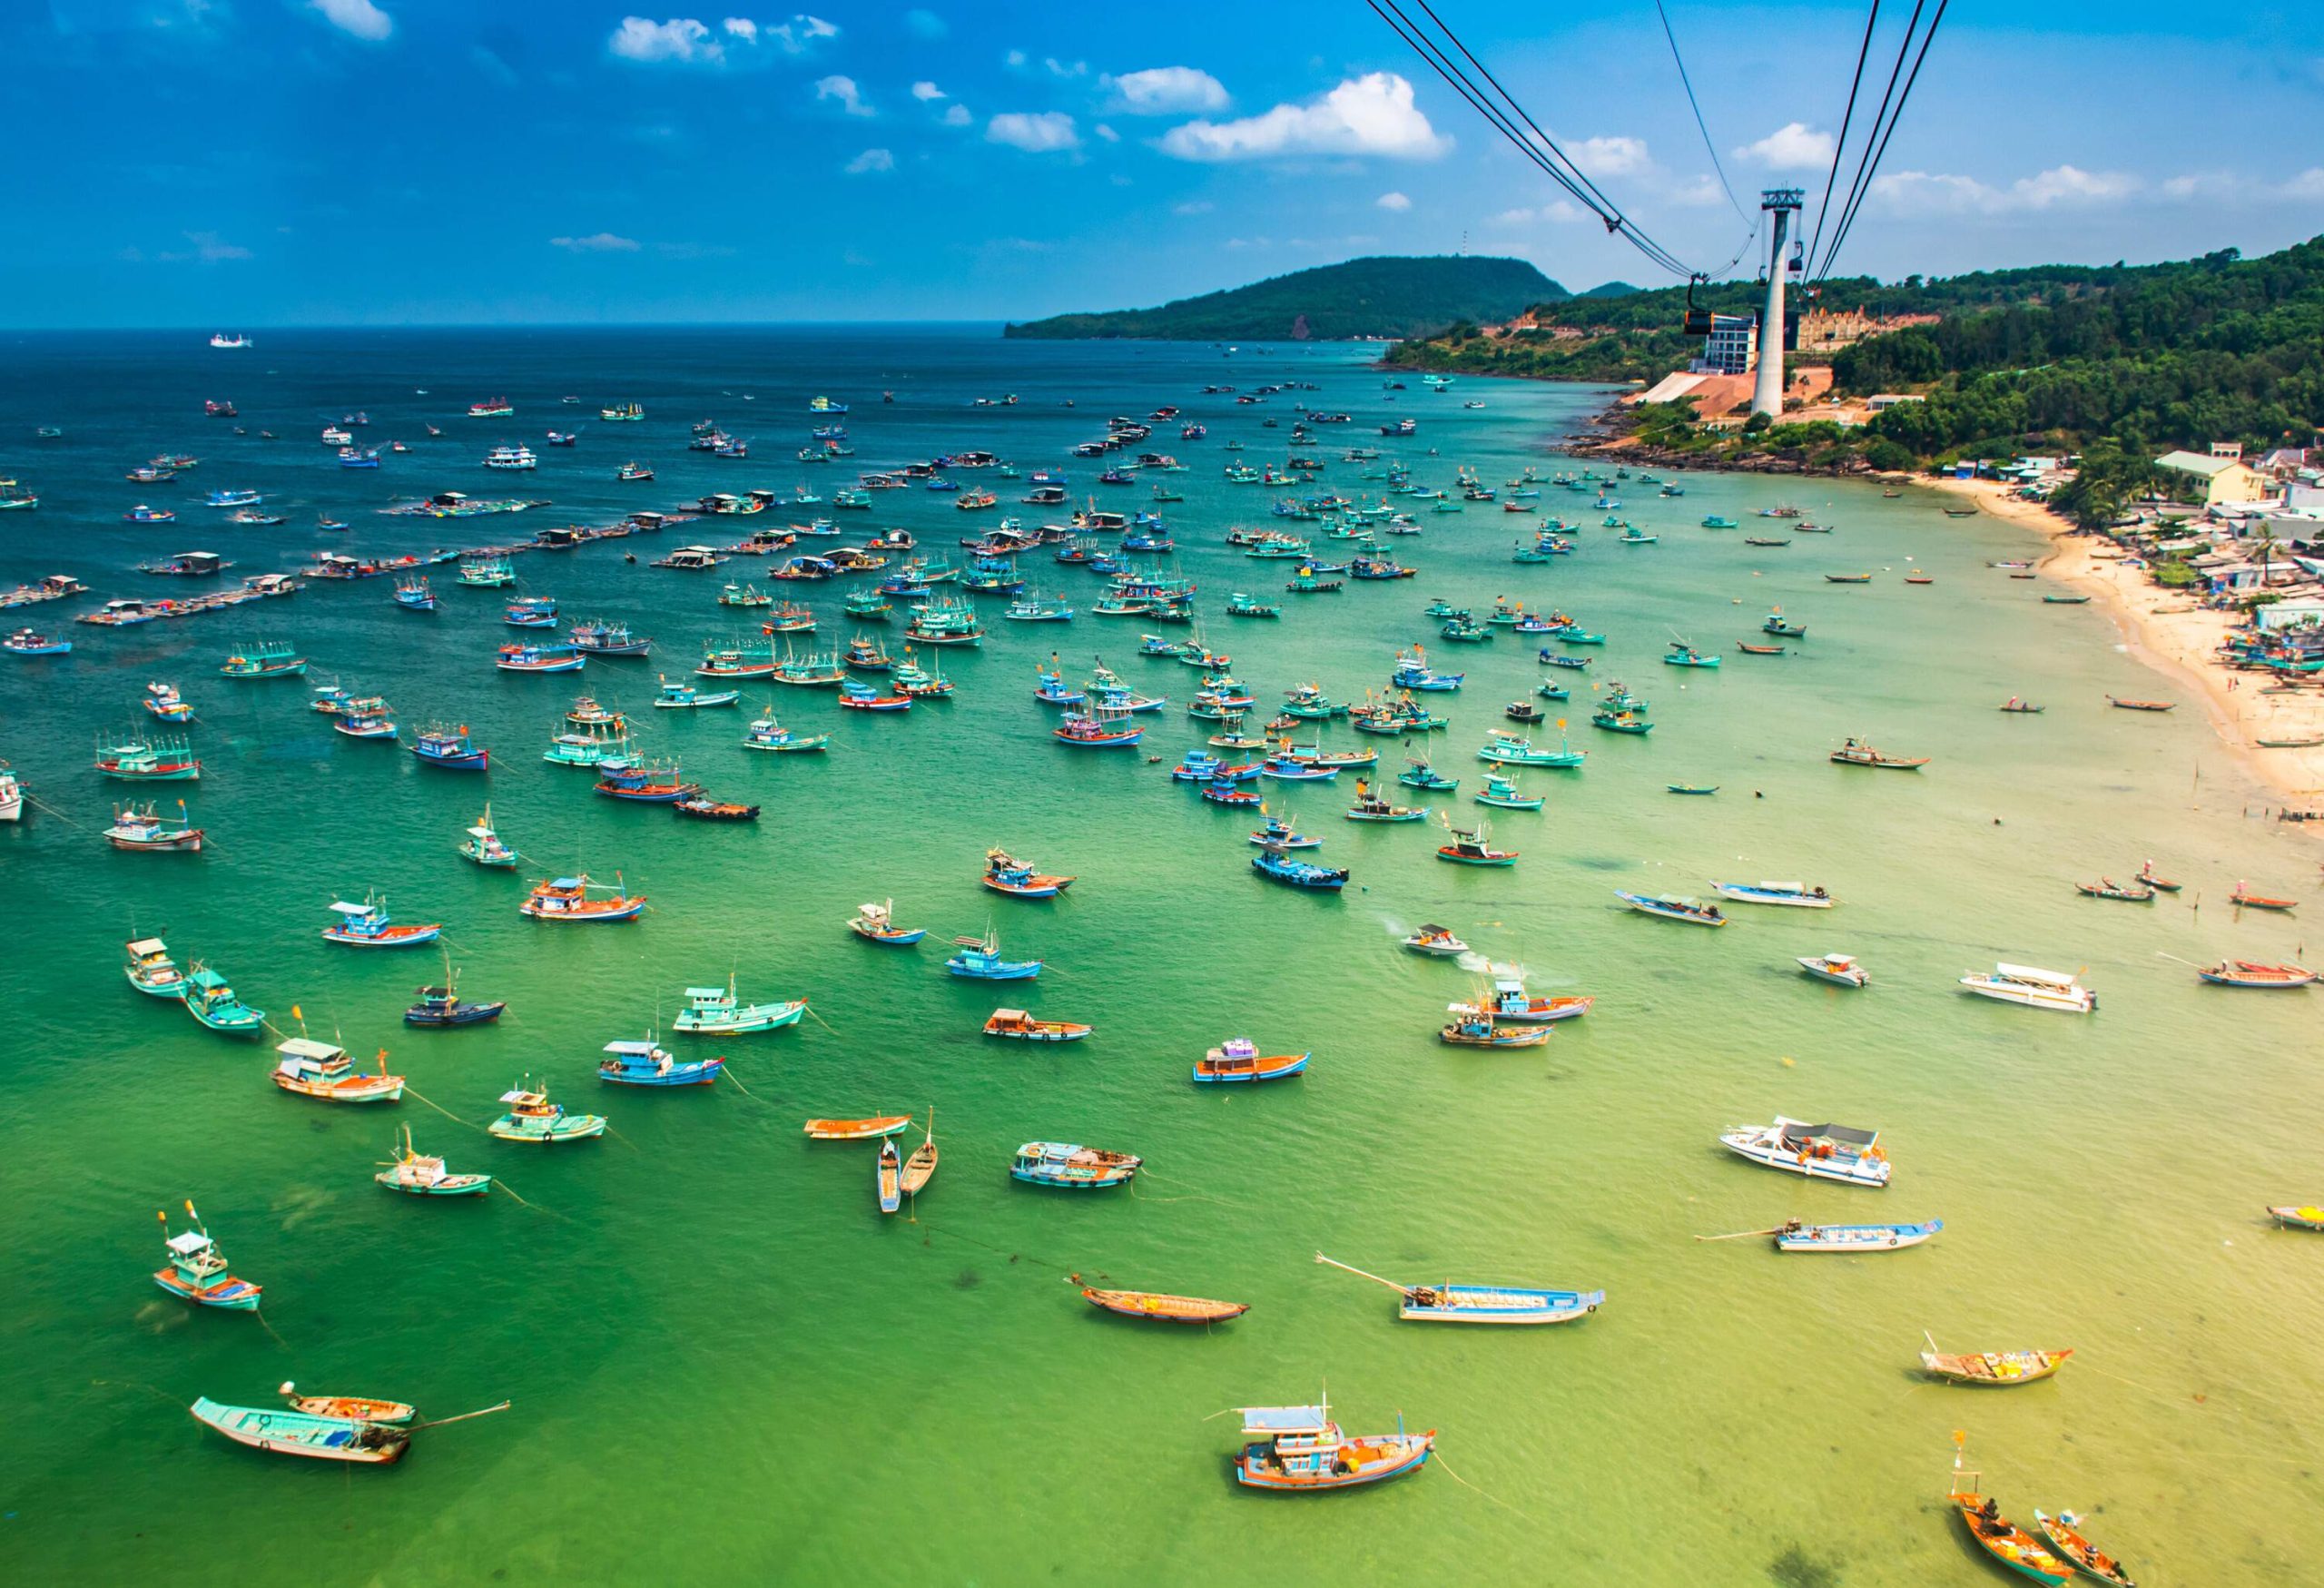 Cable cars travelling above the sea near the shore, occupied by numerous fishing boats docked on the shallow emerald green waters.